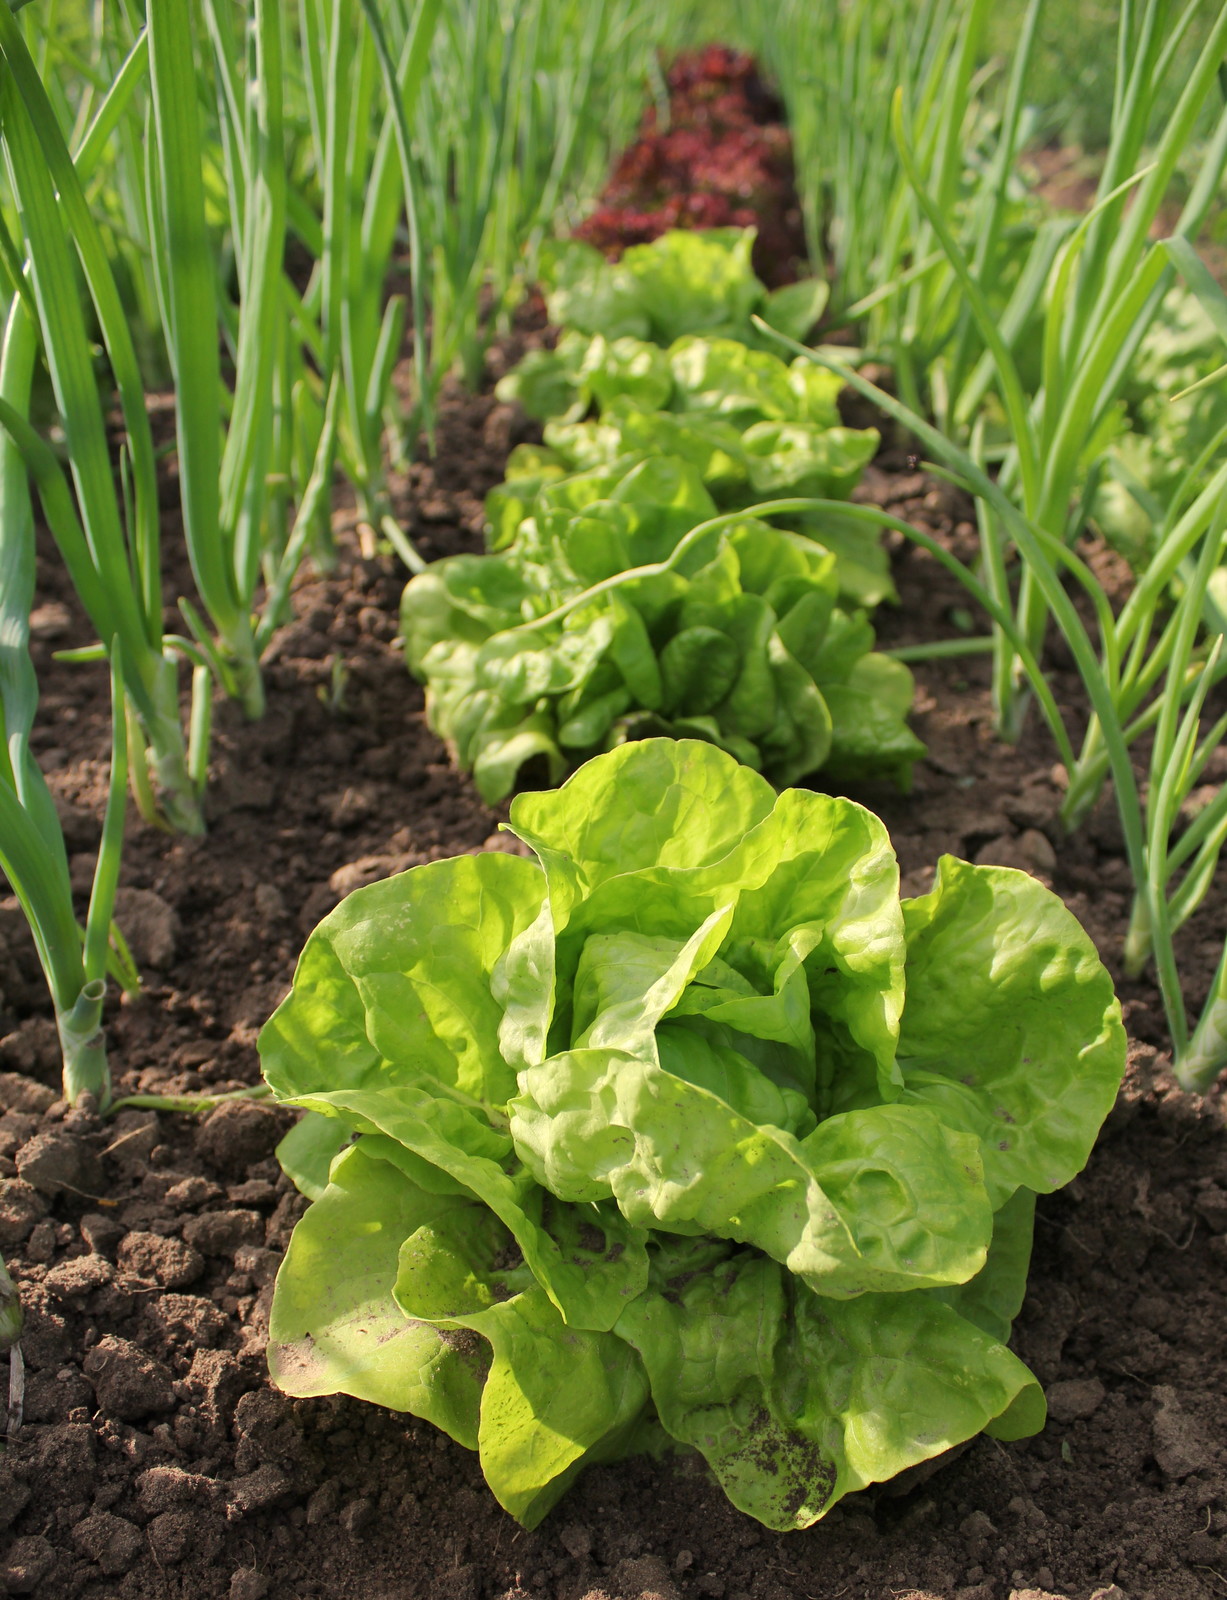 Intercropping lettuce and onions